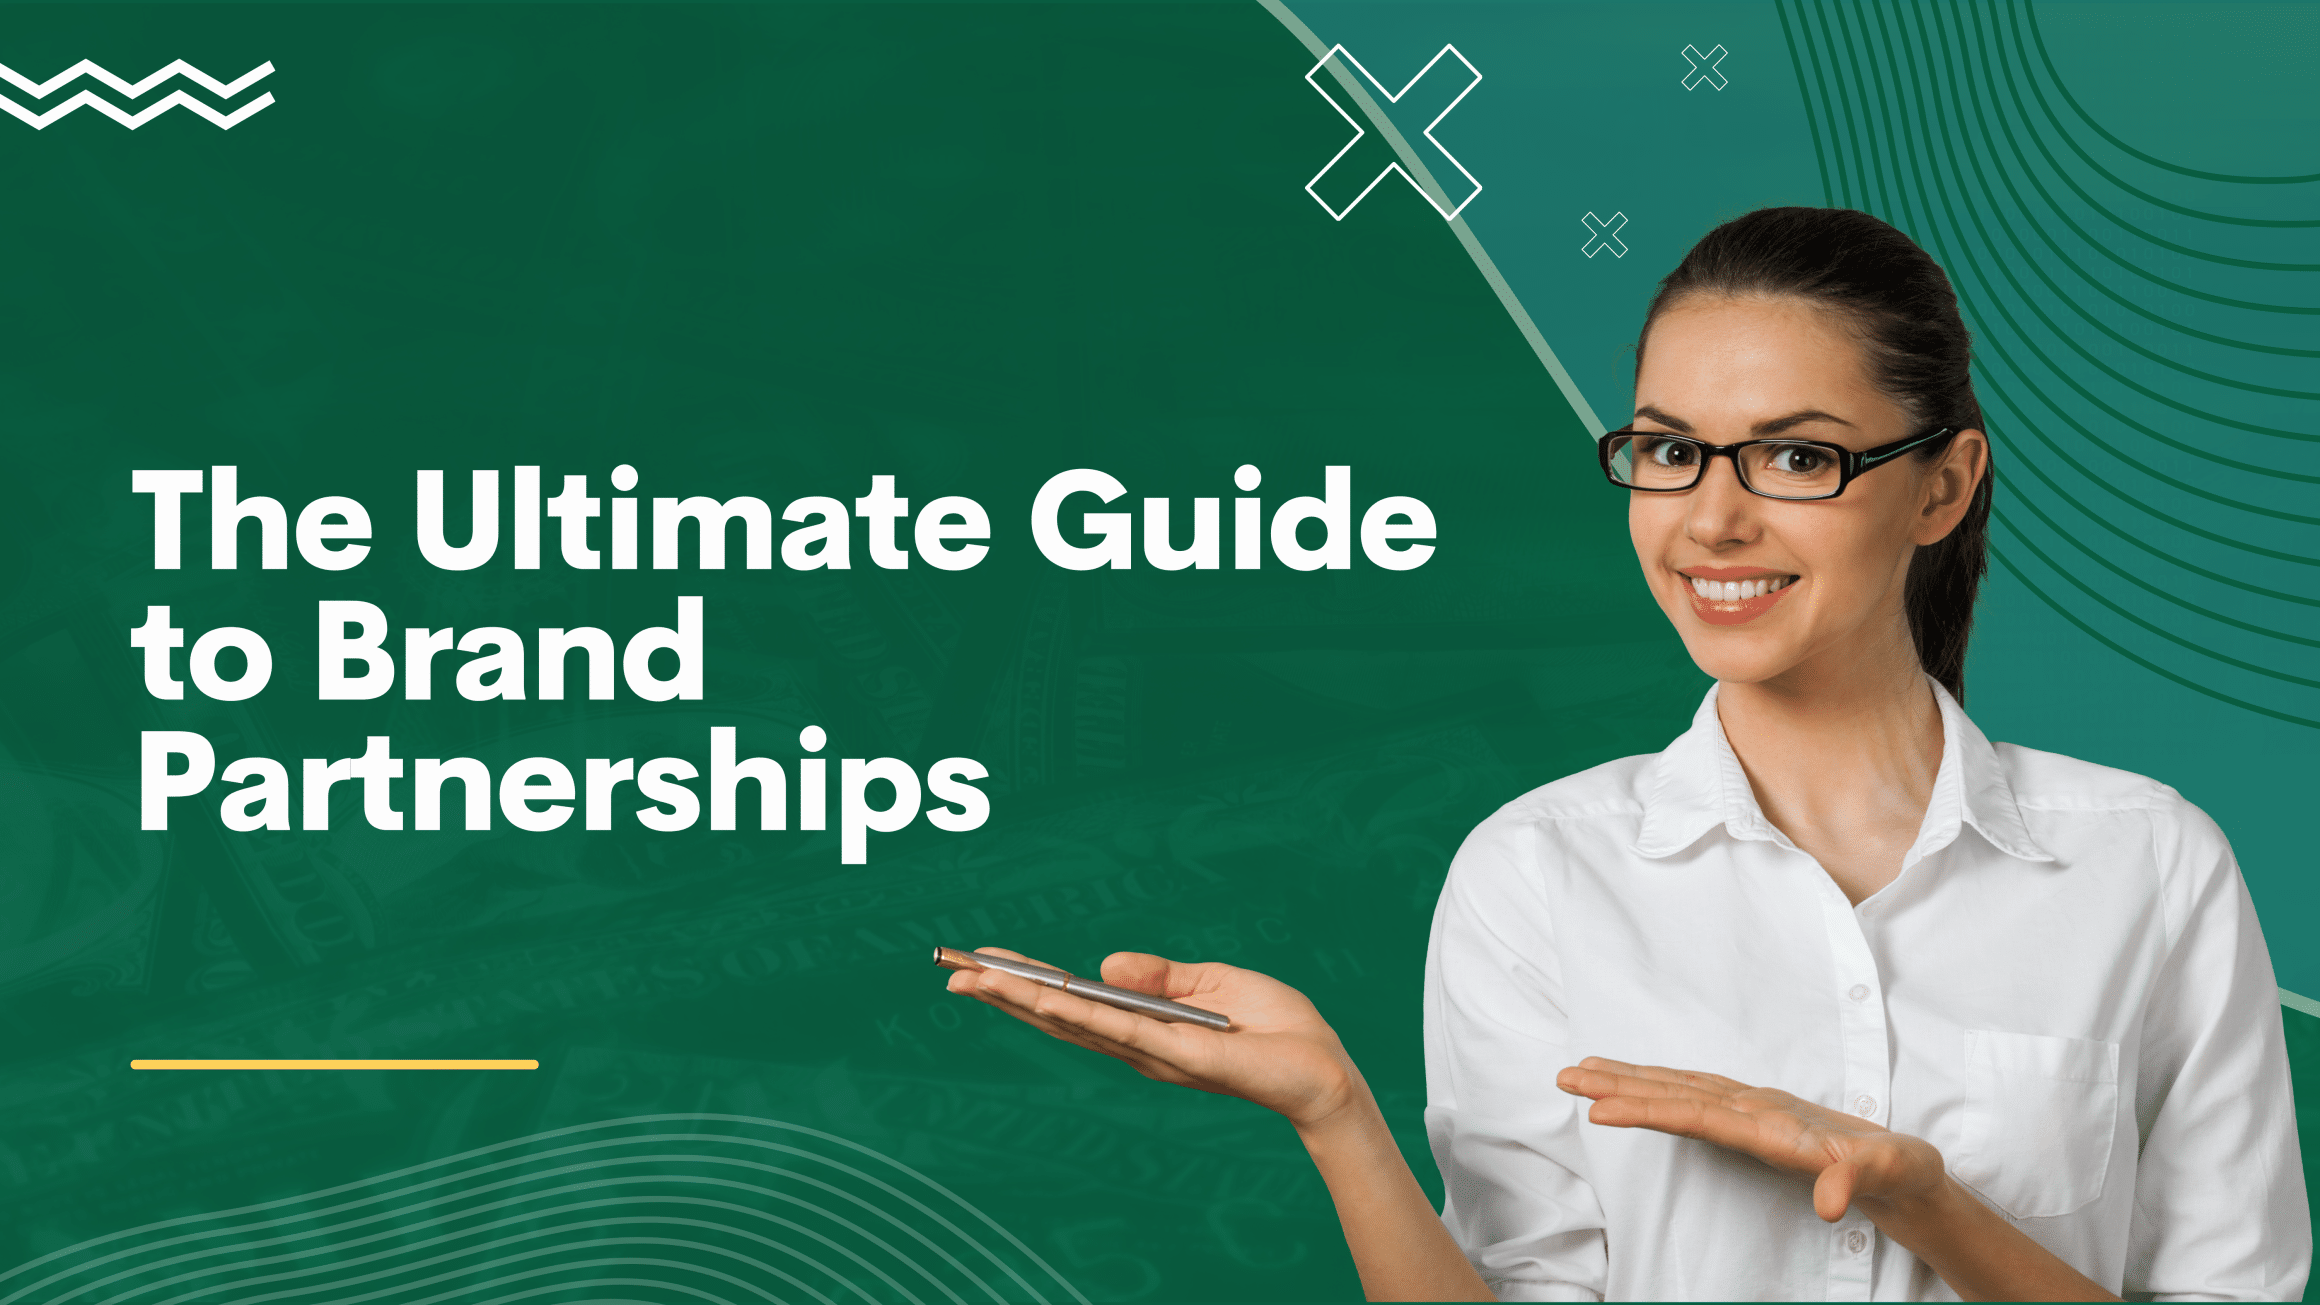 The Ultimate Guide to Brand Partnerships